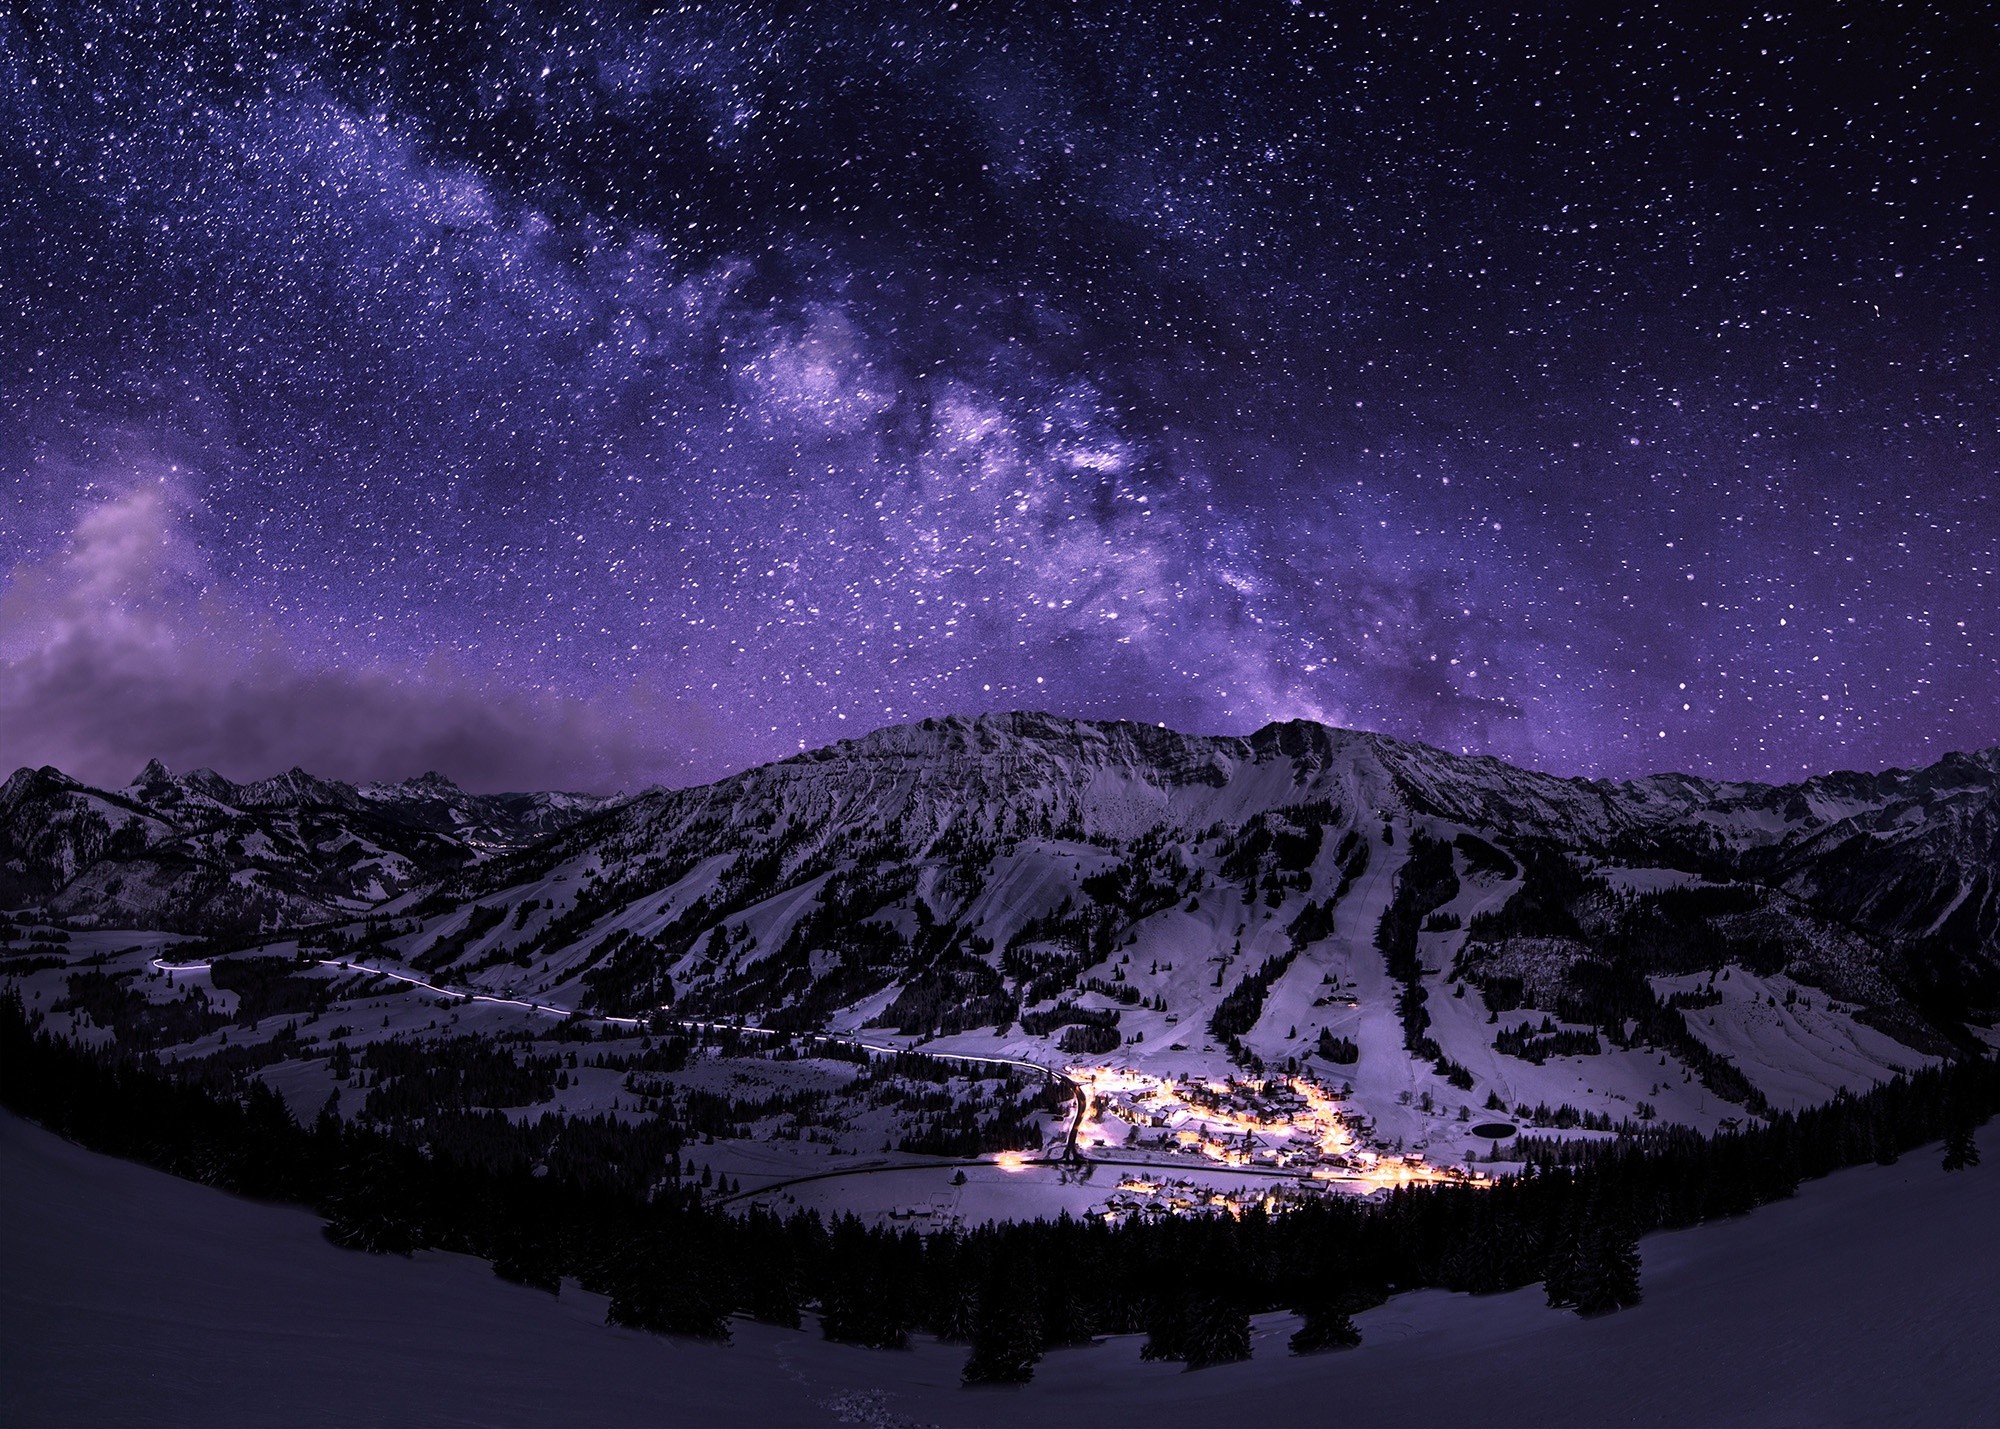 General 2000x1429 night landscape starry night mountains snow long exposure town galaxy nature low light